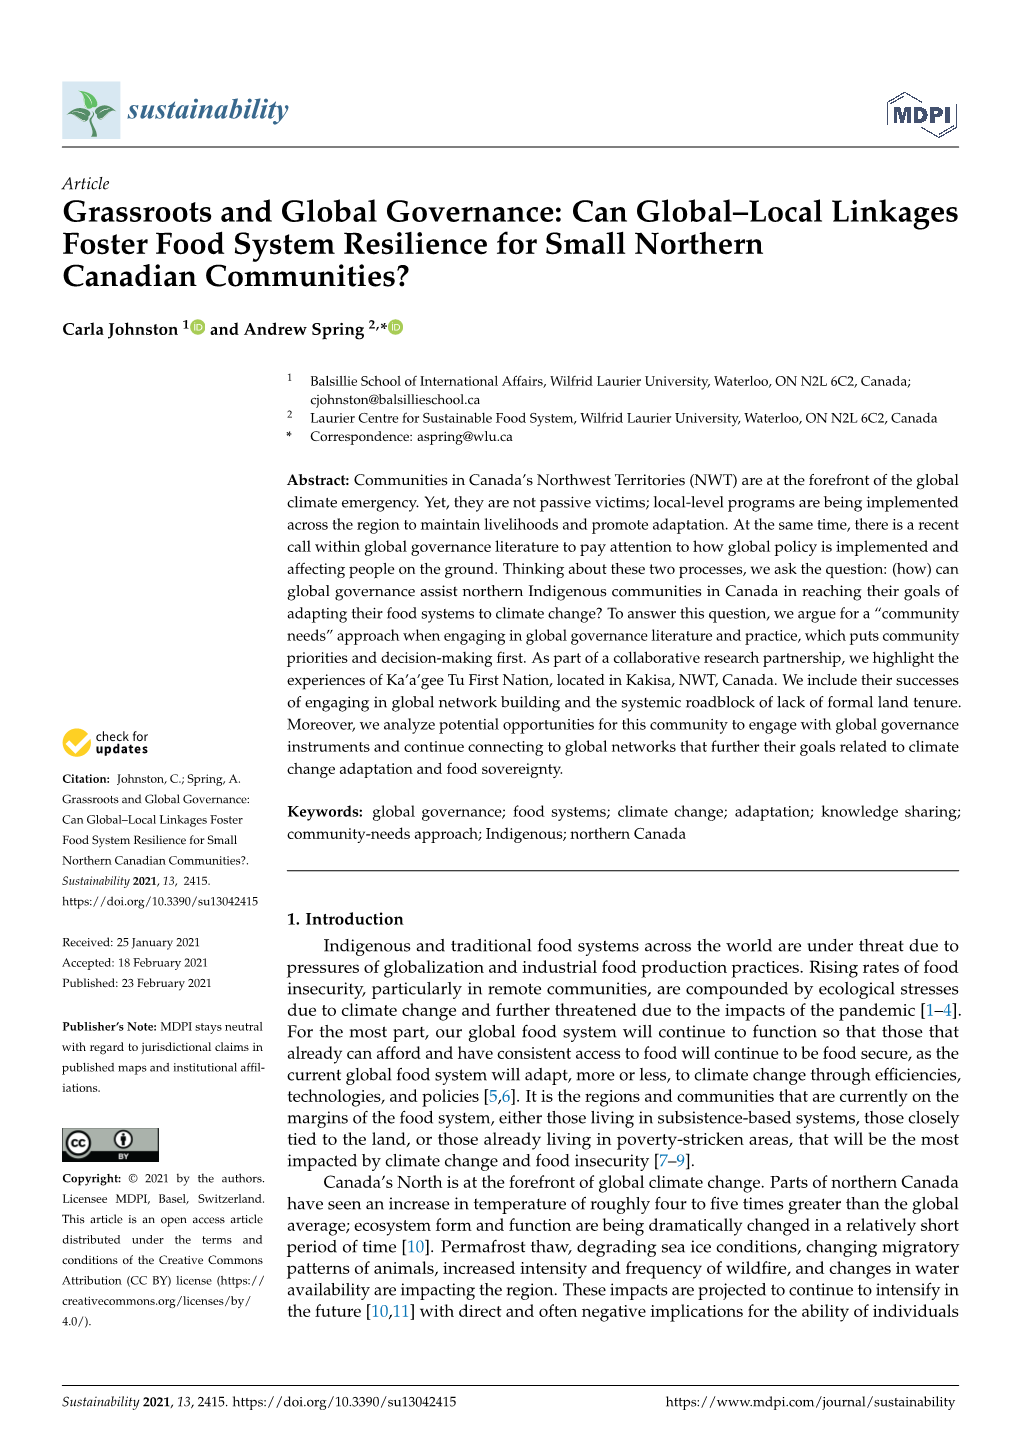 Grassroots And Global Governance Can Globallocal Linkages Foster Food System Resilience For 8512